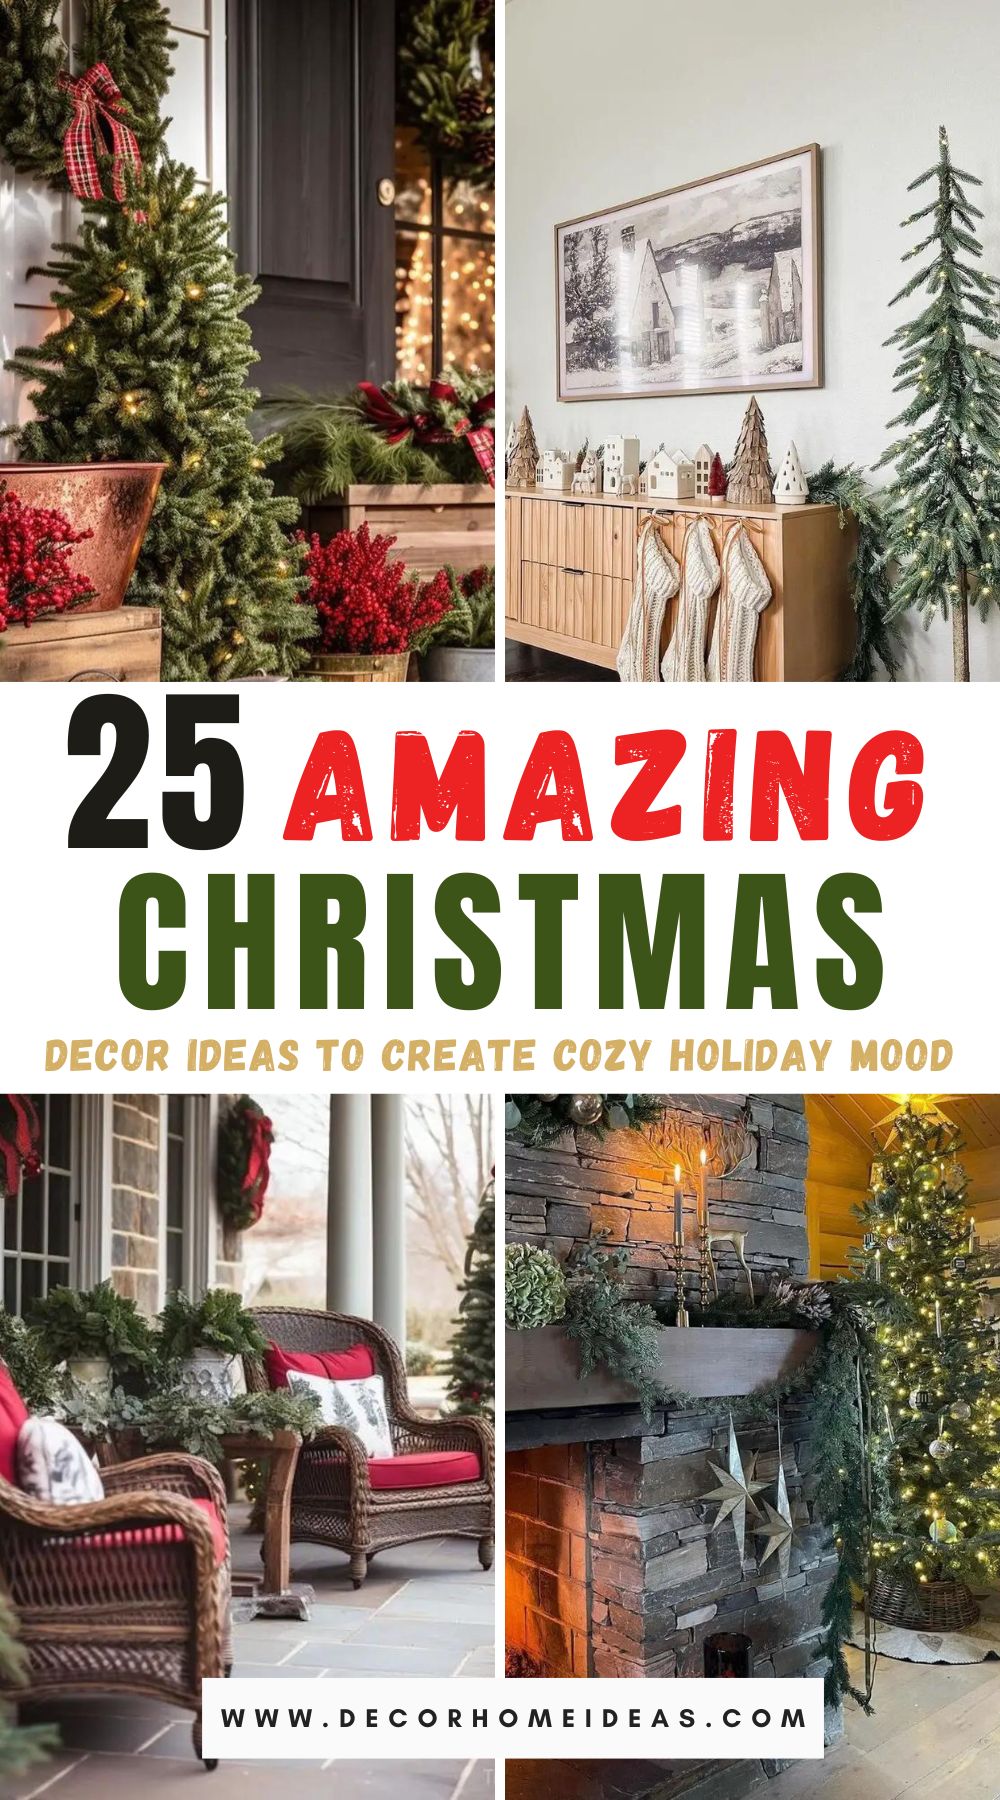 Transform your space into a cozy holiday haven with 25 enchanting Christmas decor ideas. From festive lighting to charming ornaments, discover the perfect inspiration to infuse warmth and joy into your seasonal celebrations.